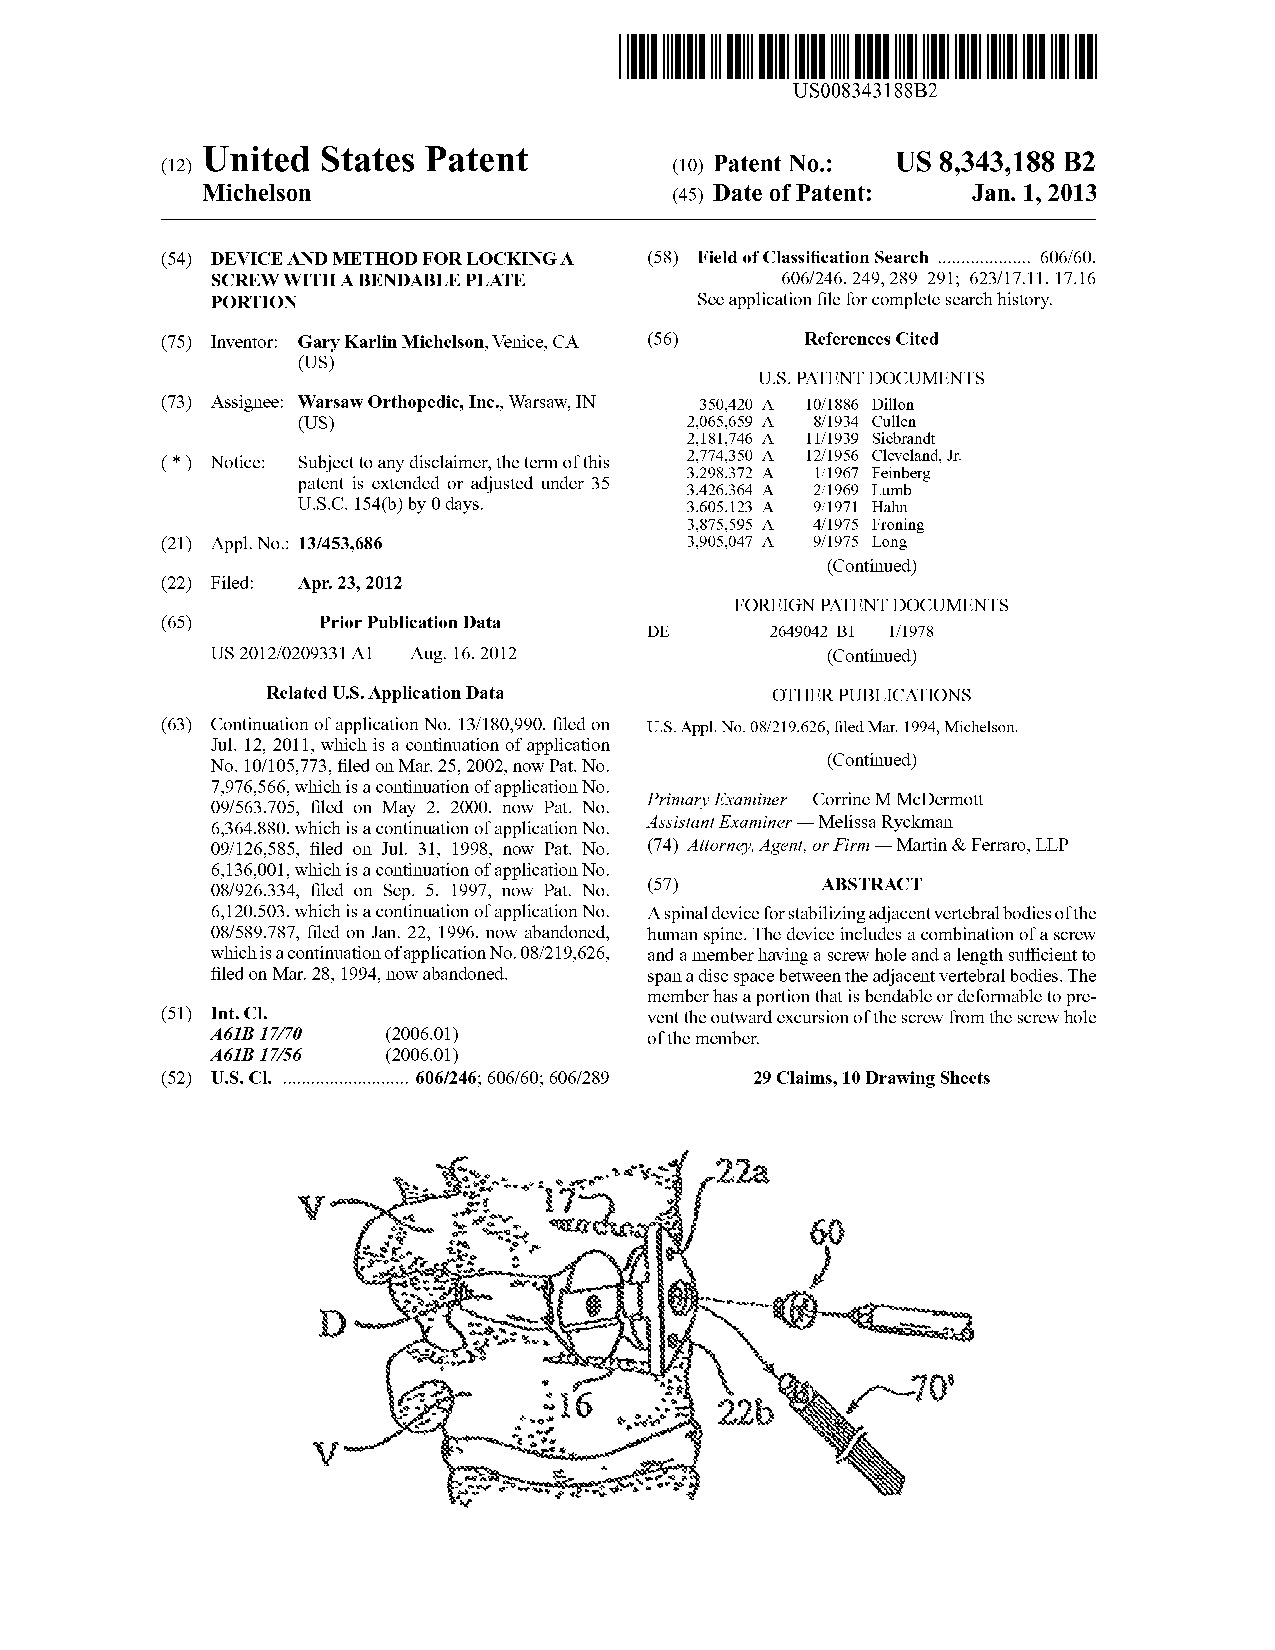 Device and method for locking a screw with a bendable plate portion - Patent 8,343,188